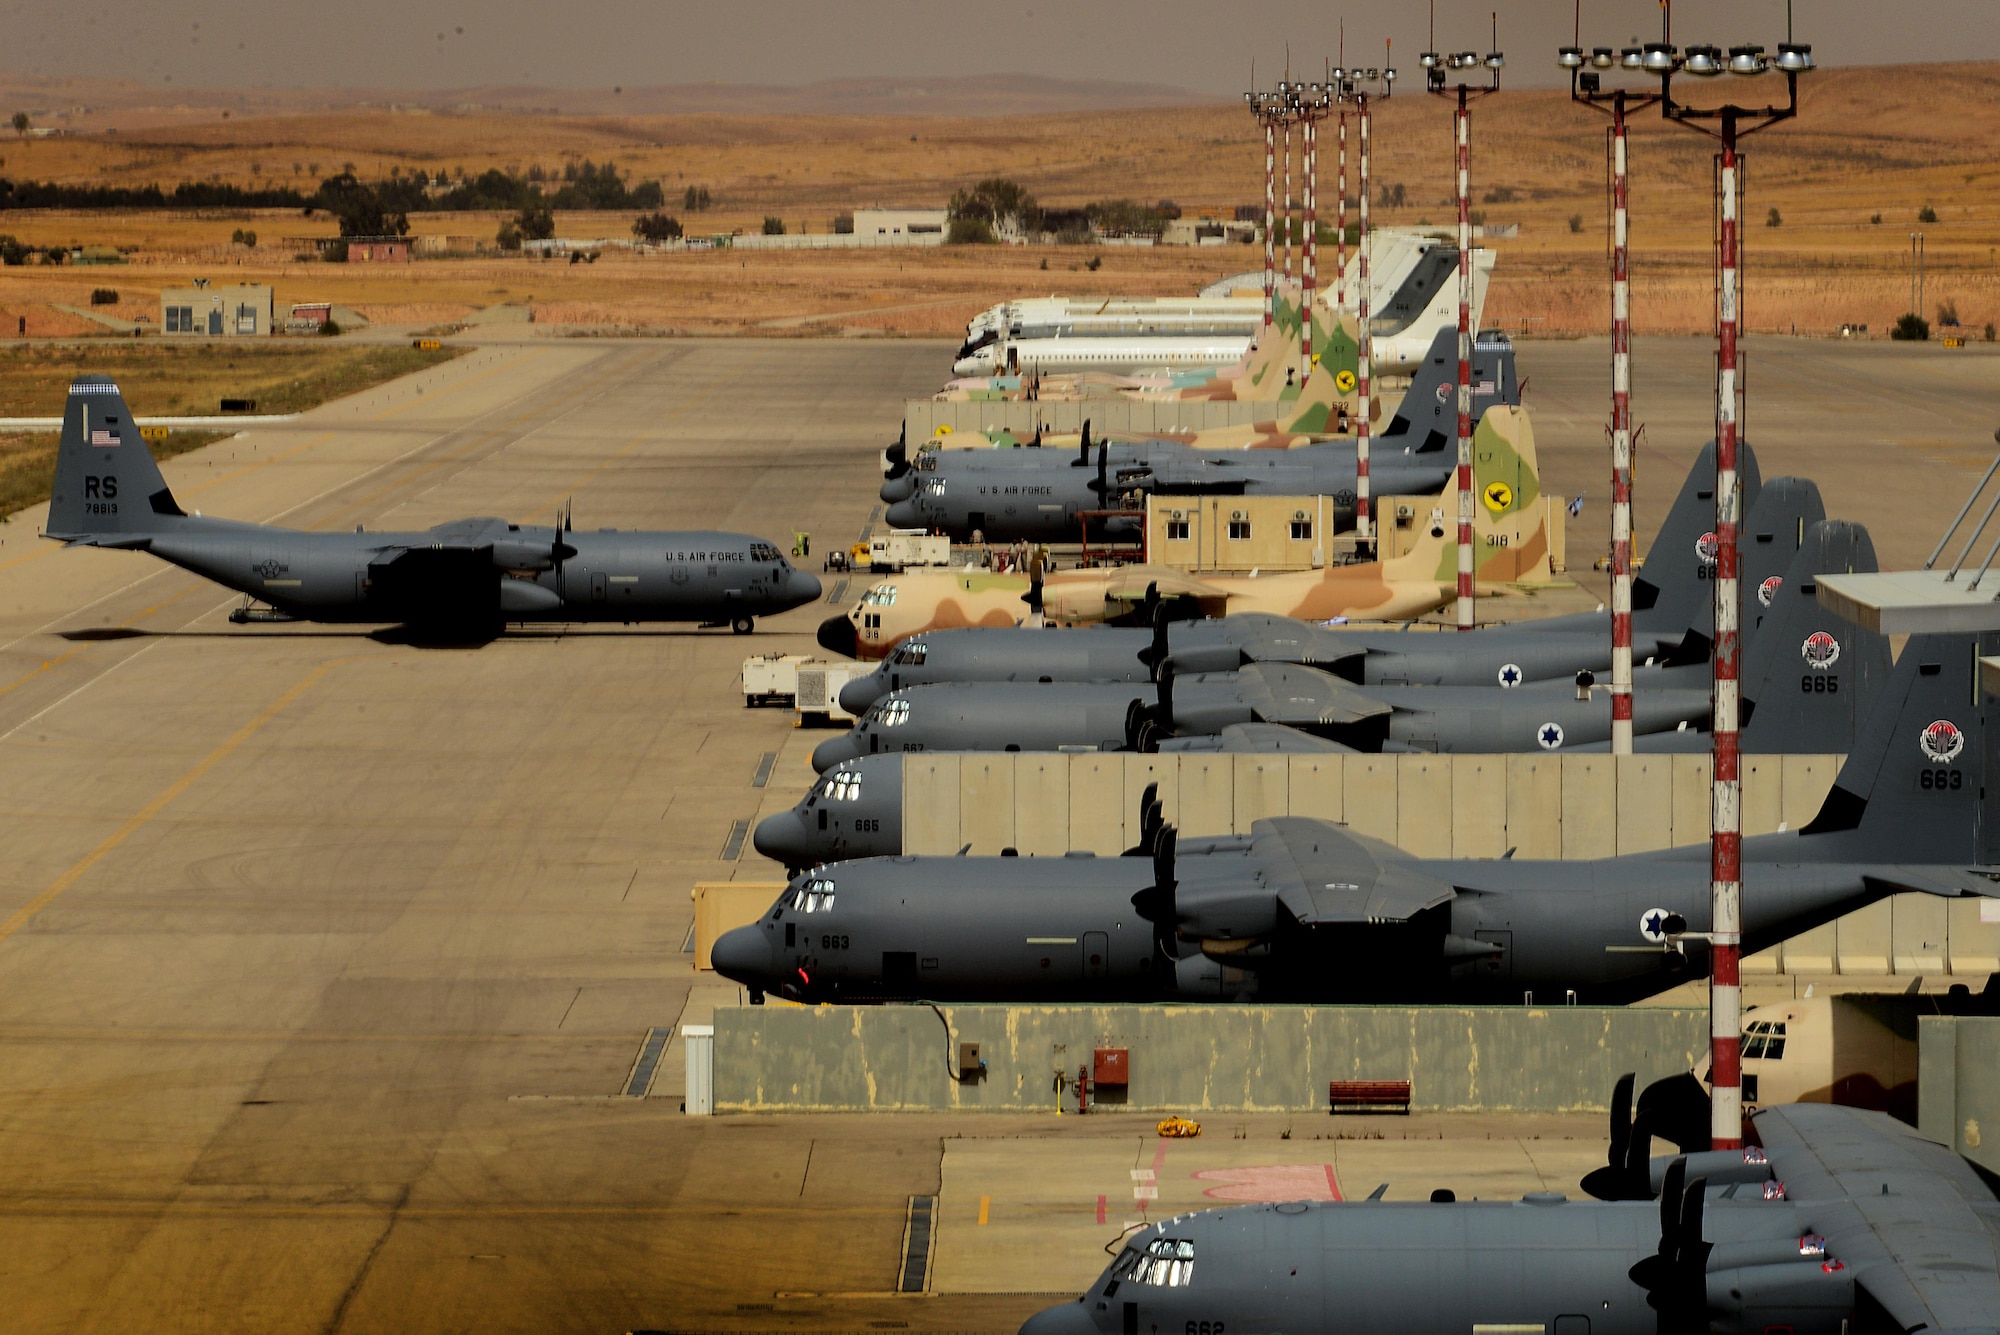 A C-130J Super Hercules assigned to the 37th Airlift Squadron, 86th Airlift Wing, Ramstein Air Base, Germany, taxis to park after completion of a sortie in support of exercise Juniper Falcon May 14, at Nevatim Air Force Base, Israel. Juniper Falcon 17 represents the combination of several bi-lateral component exercises with Israel Defense Forces that have been executed annually since 2011. These exercises were combined to increase joint training opportunities and capitalize on transportation and cost efficiencies gained by aggregating forces. (U.S. Air Force photo/ Tech. Sgt. Matthew Plew)